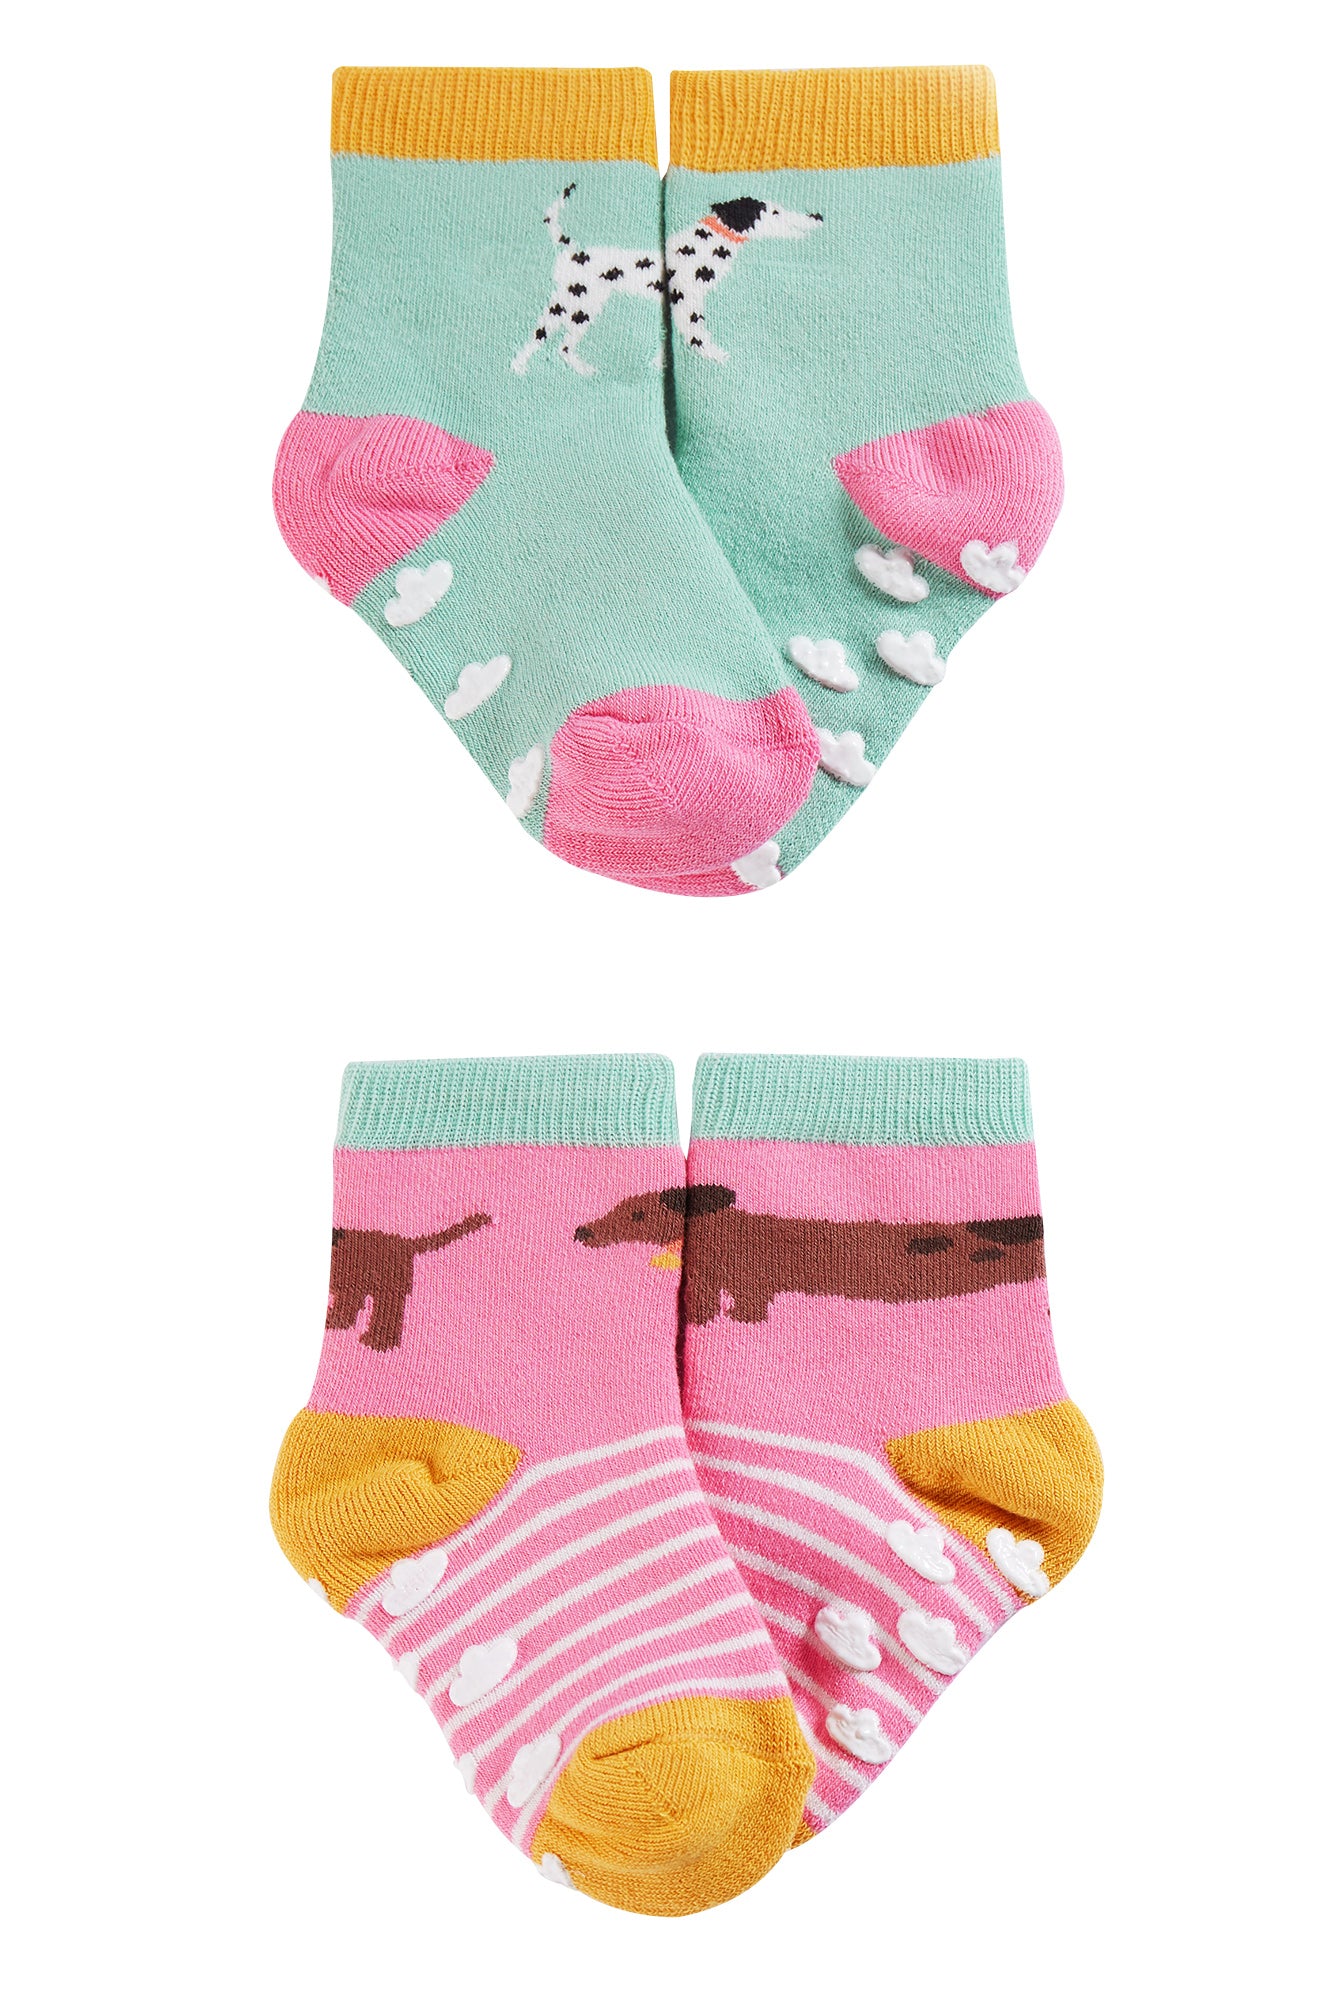 frugi grippy socks in pastel colours and fun dog designs